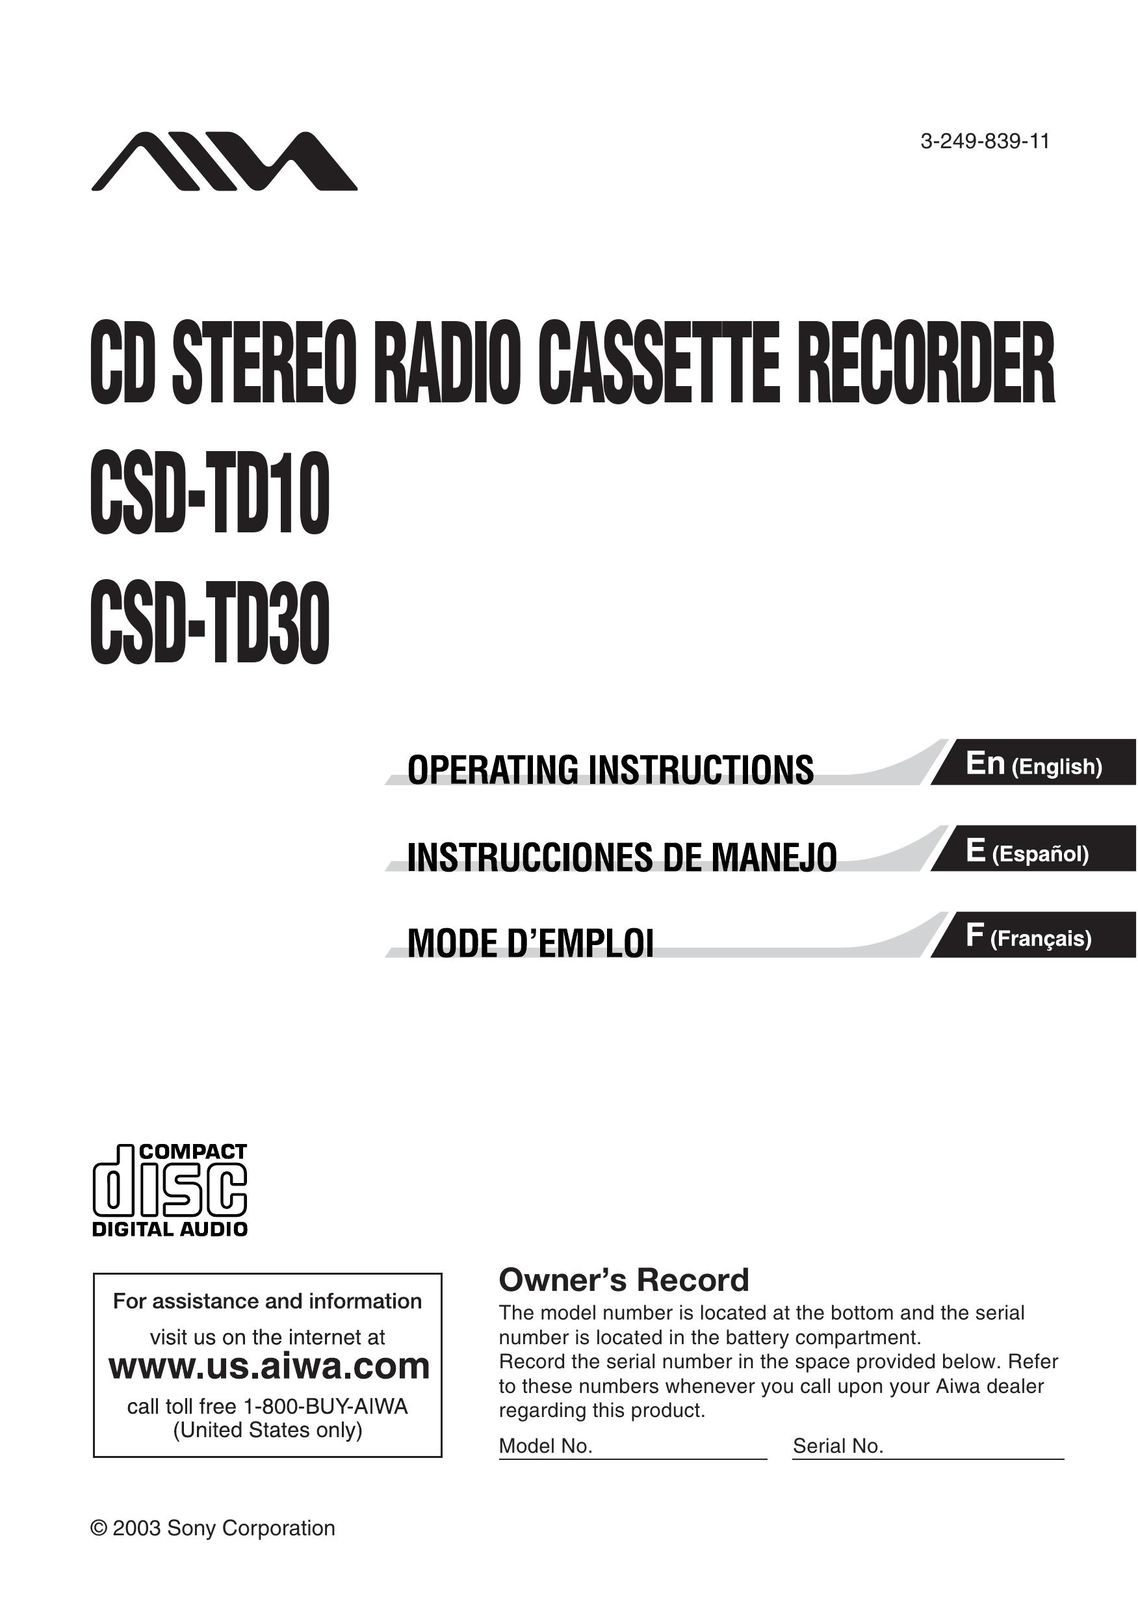 Sony CSD-TD10 Microcassette Recorder User Manual